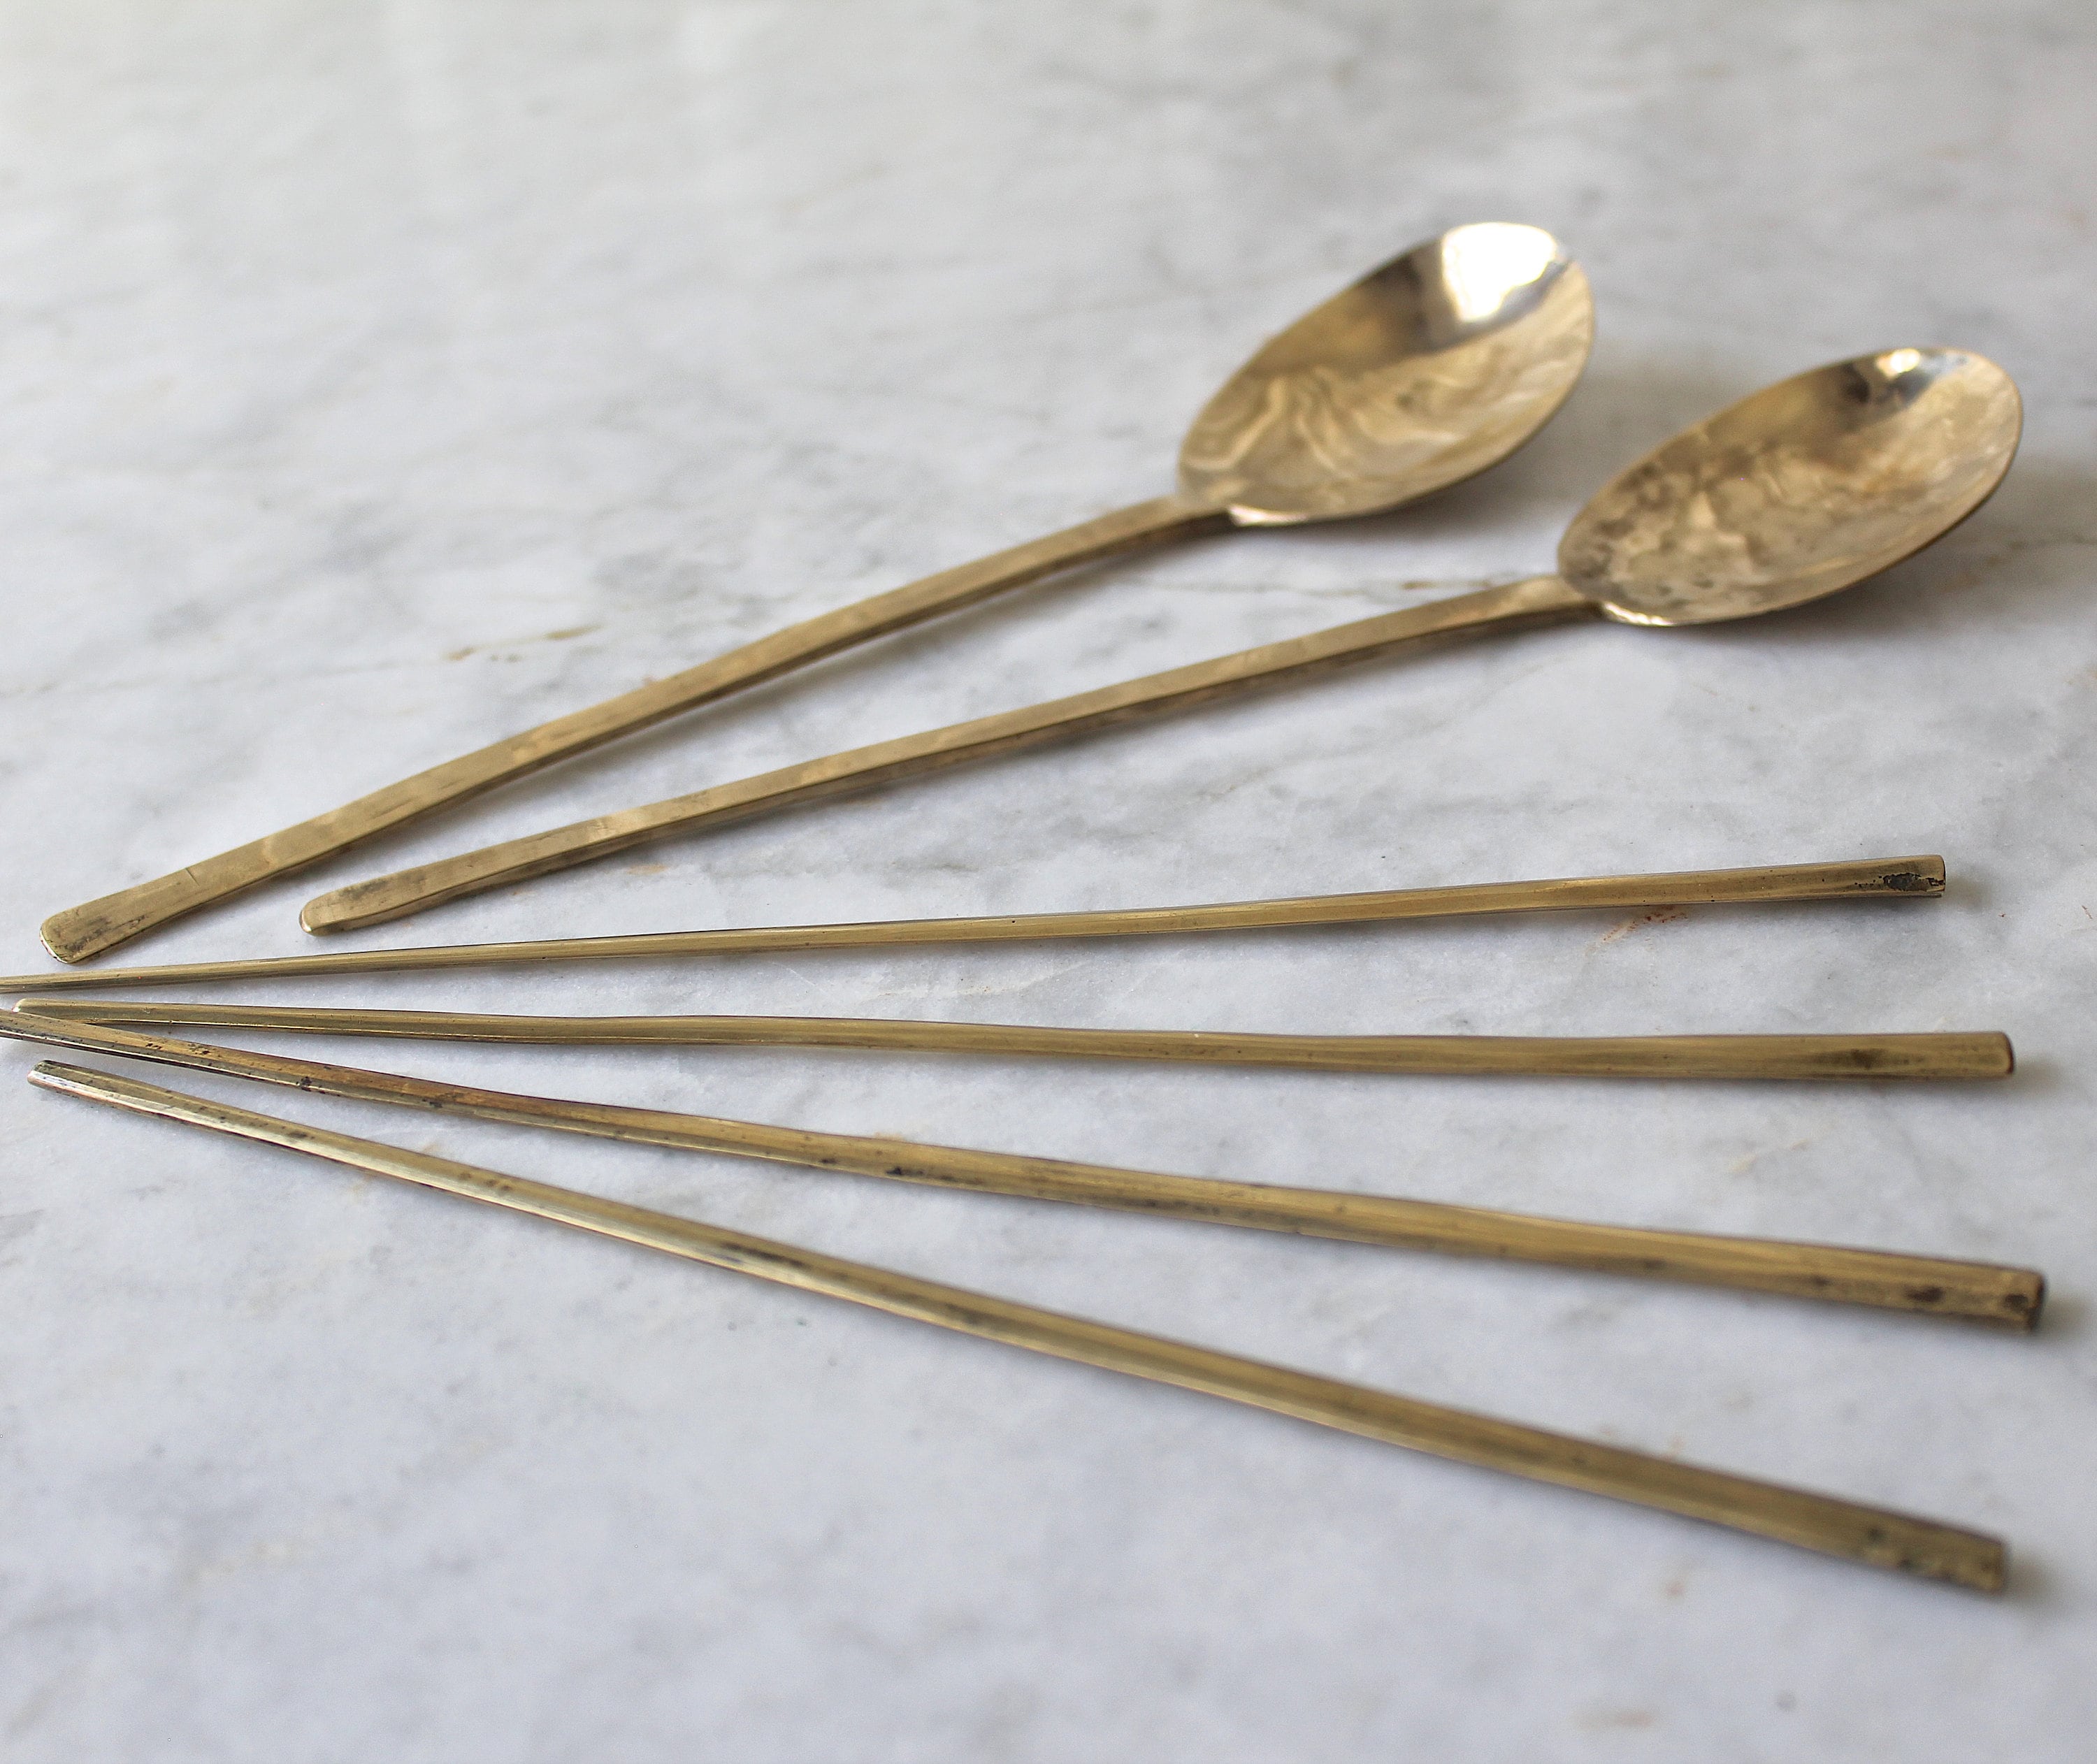 Found old spoons buried. Any ideas? | Page 2 | Antiques Board